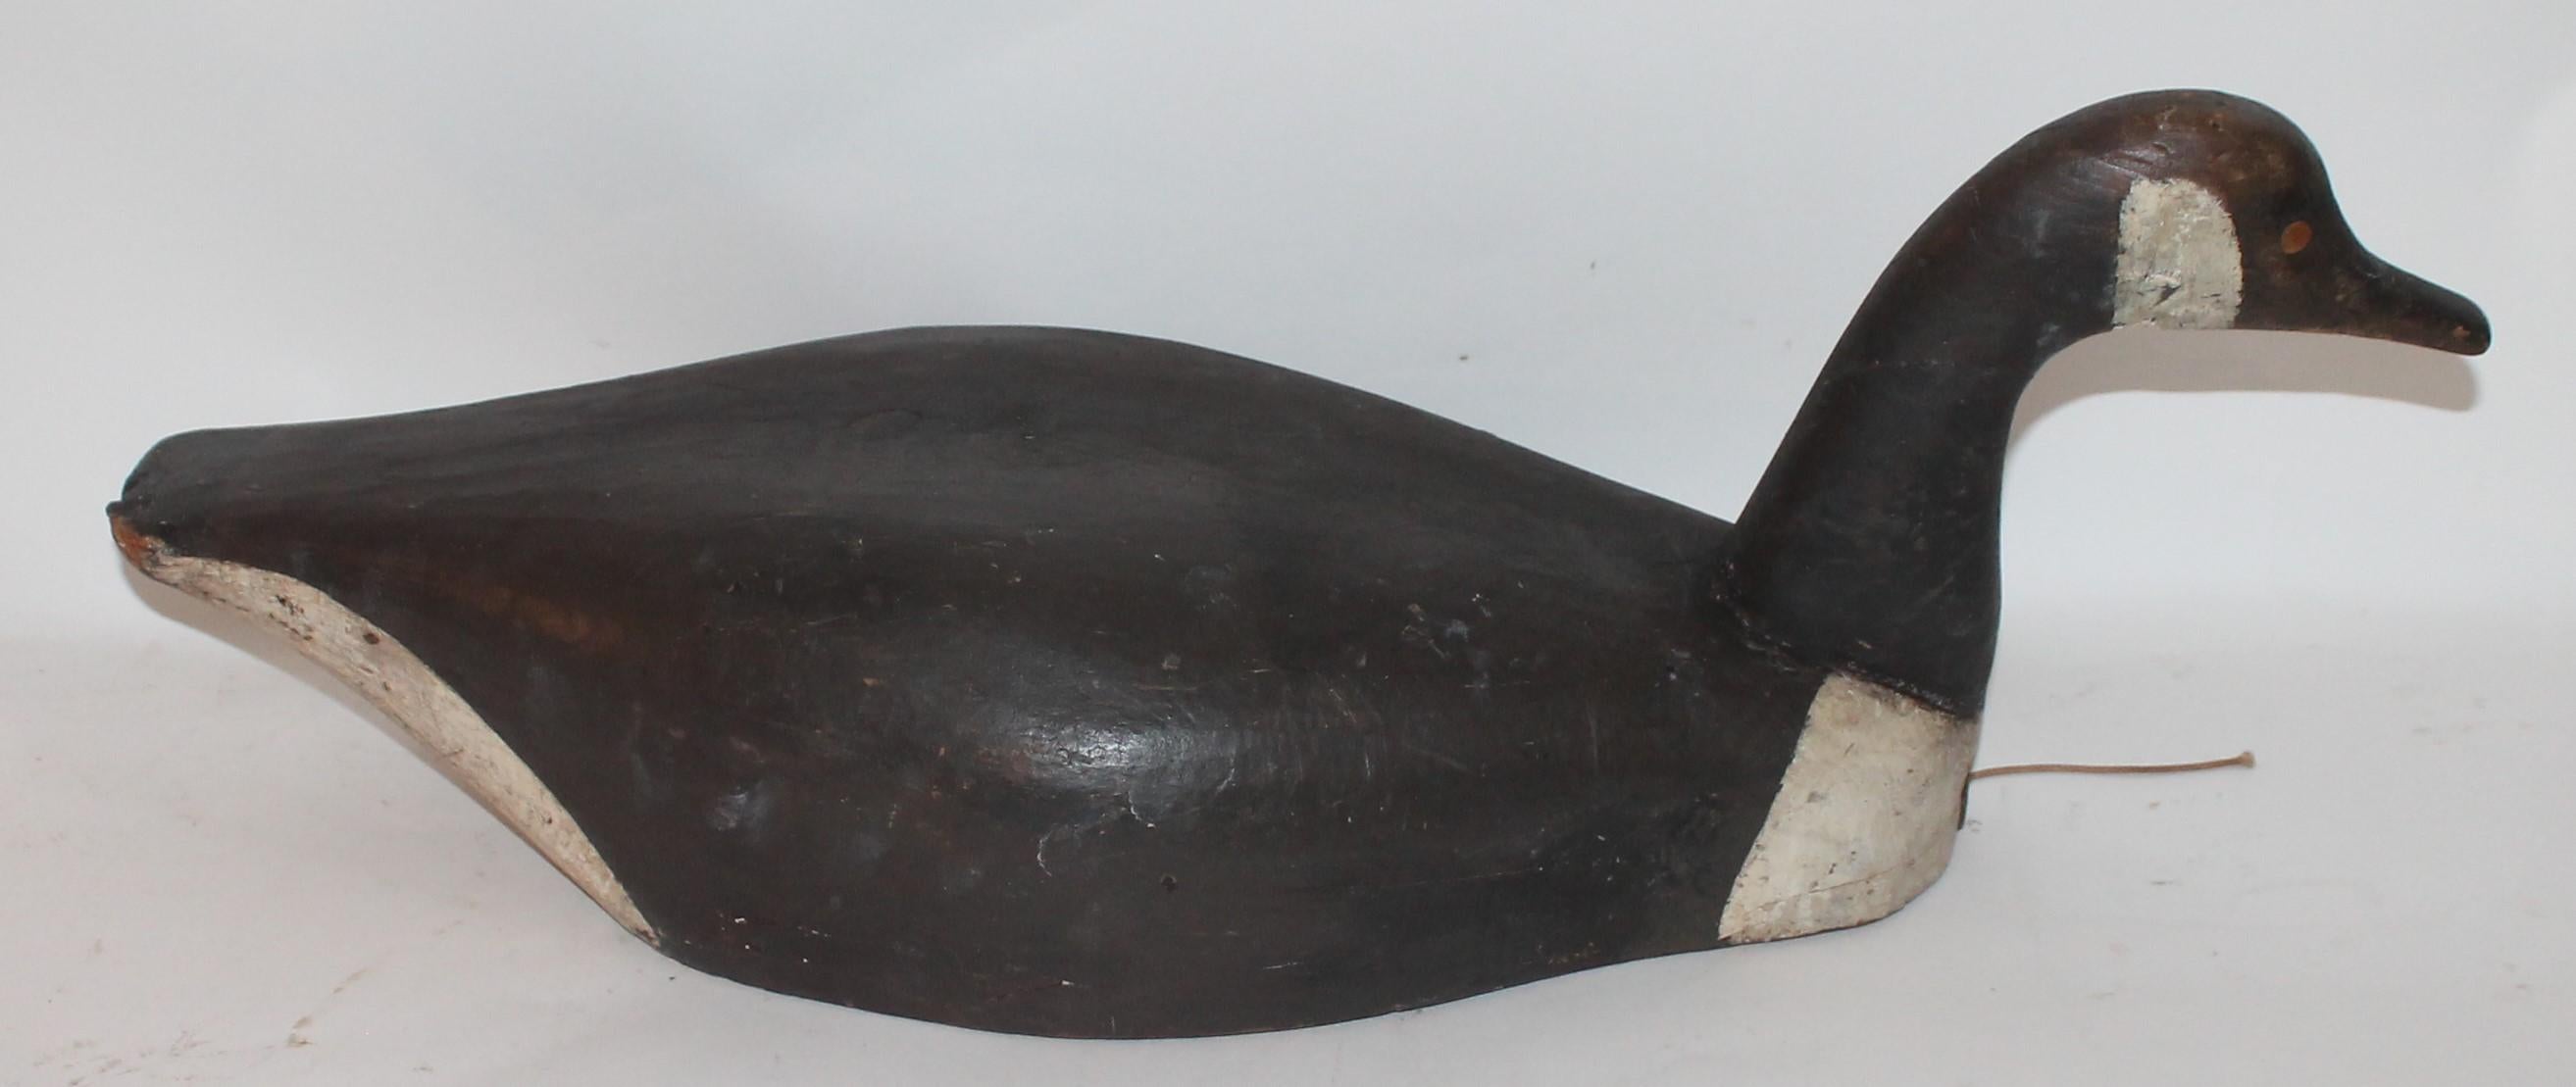 This fine hand carved and original painted Canadian goose has a wonderful patinated surface and great form. The condition is very good and has shrinkage crack on the base consistent from age and use. Notice the form of the tail end and fine carved